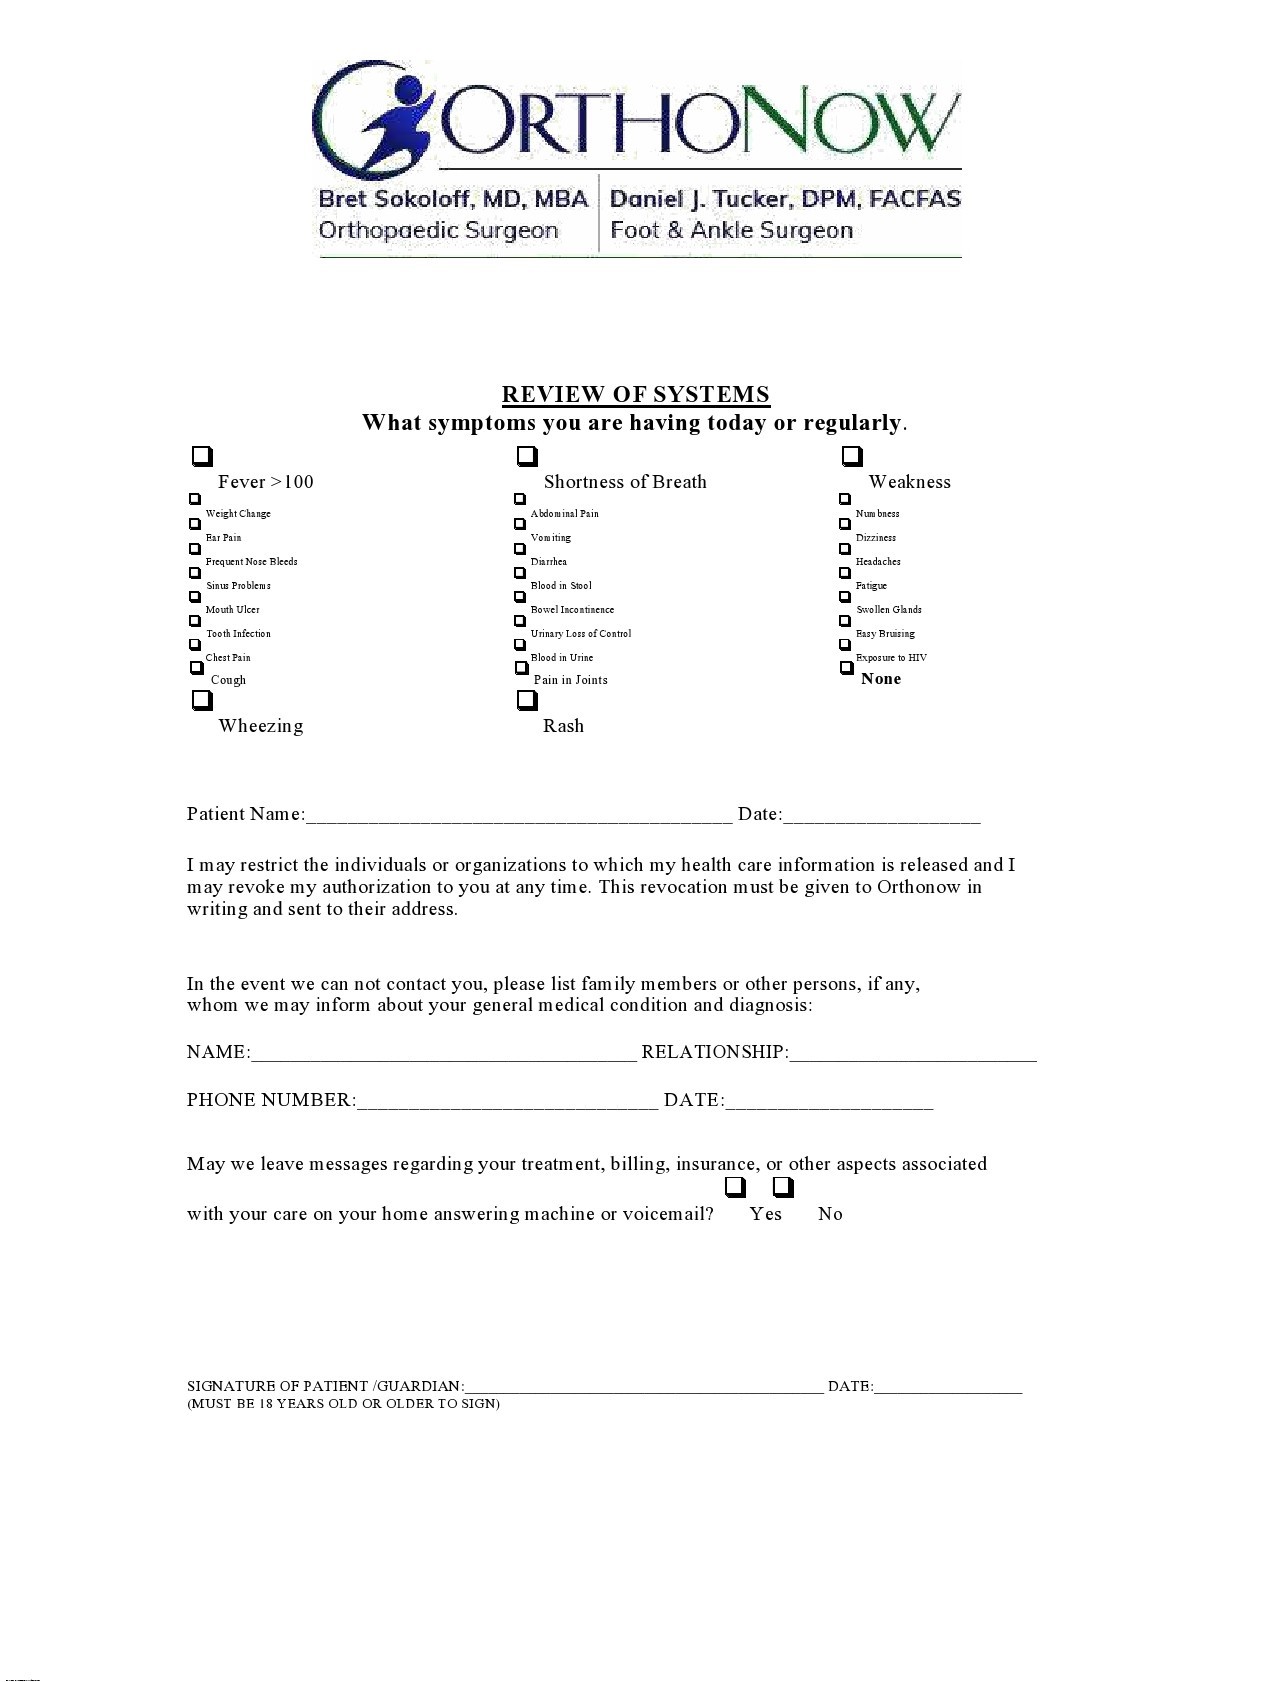 Free review of systems template 41